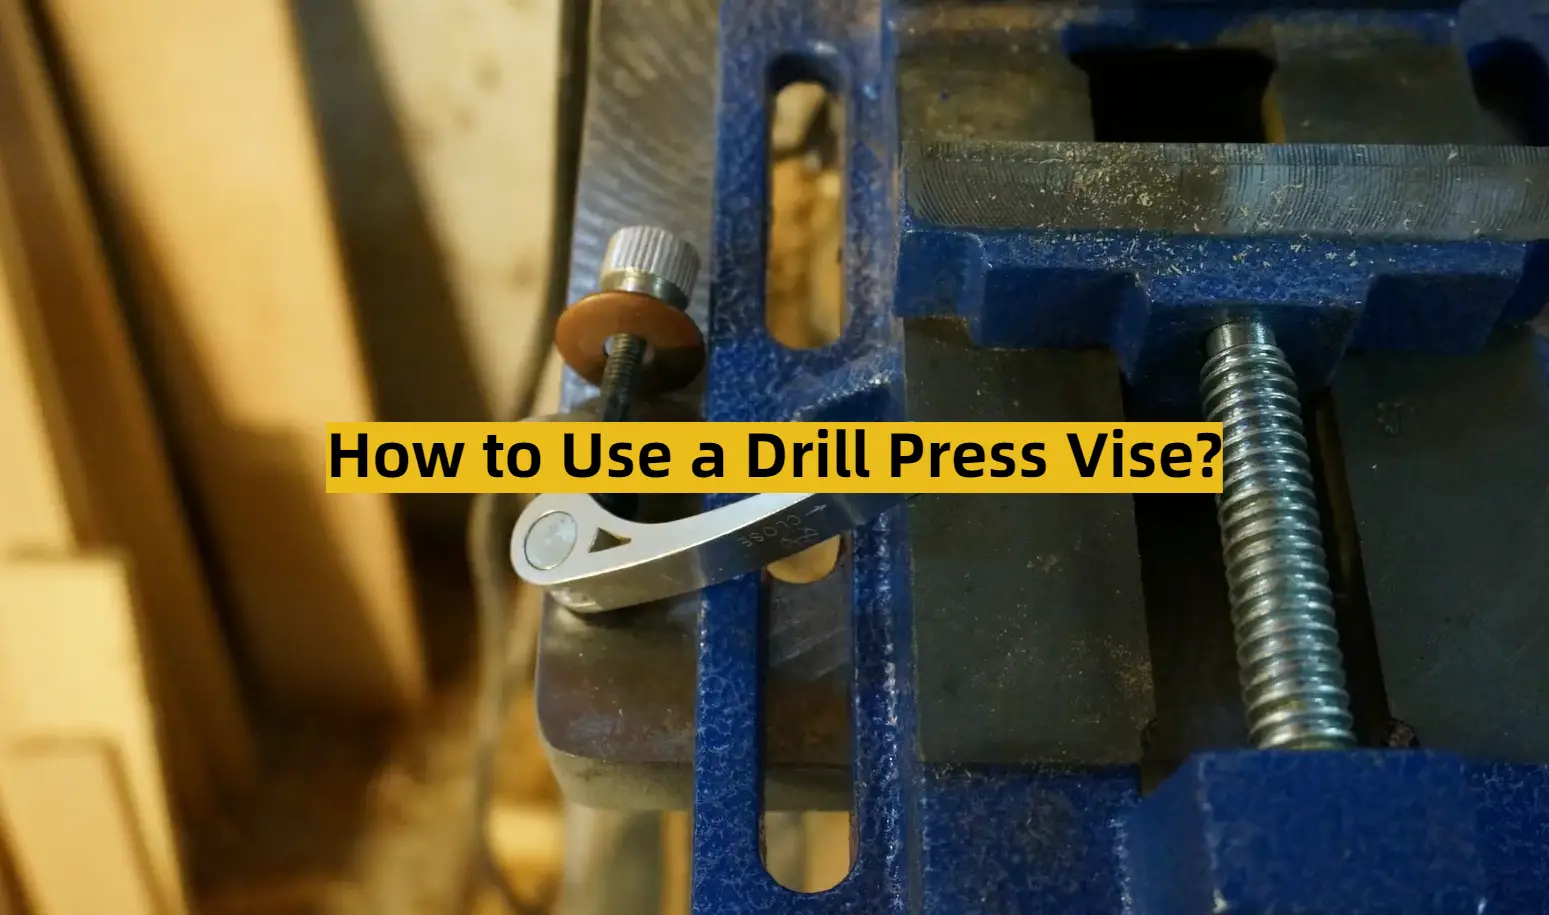 How to Use a Drill Press Vise?